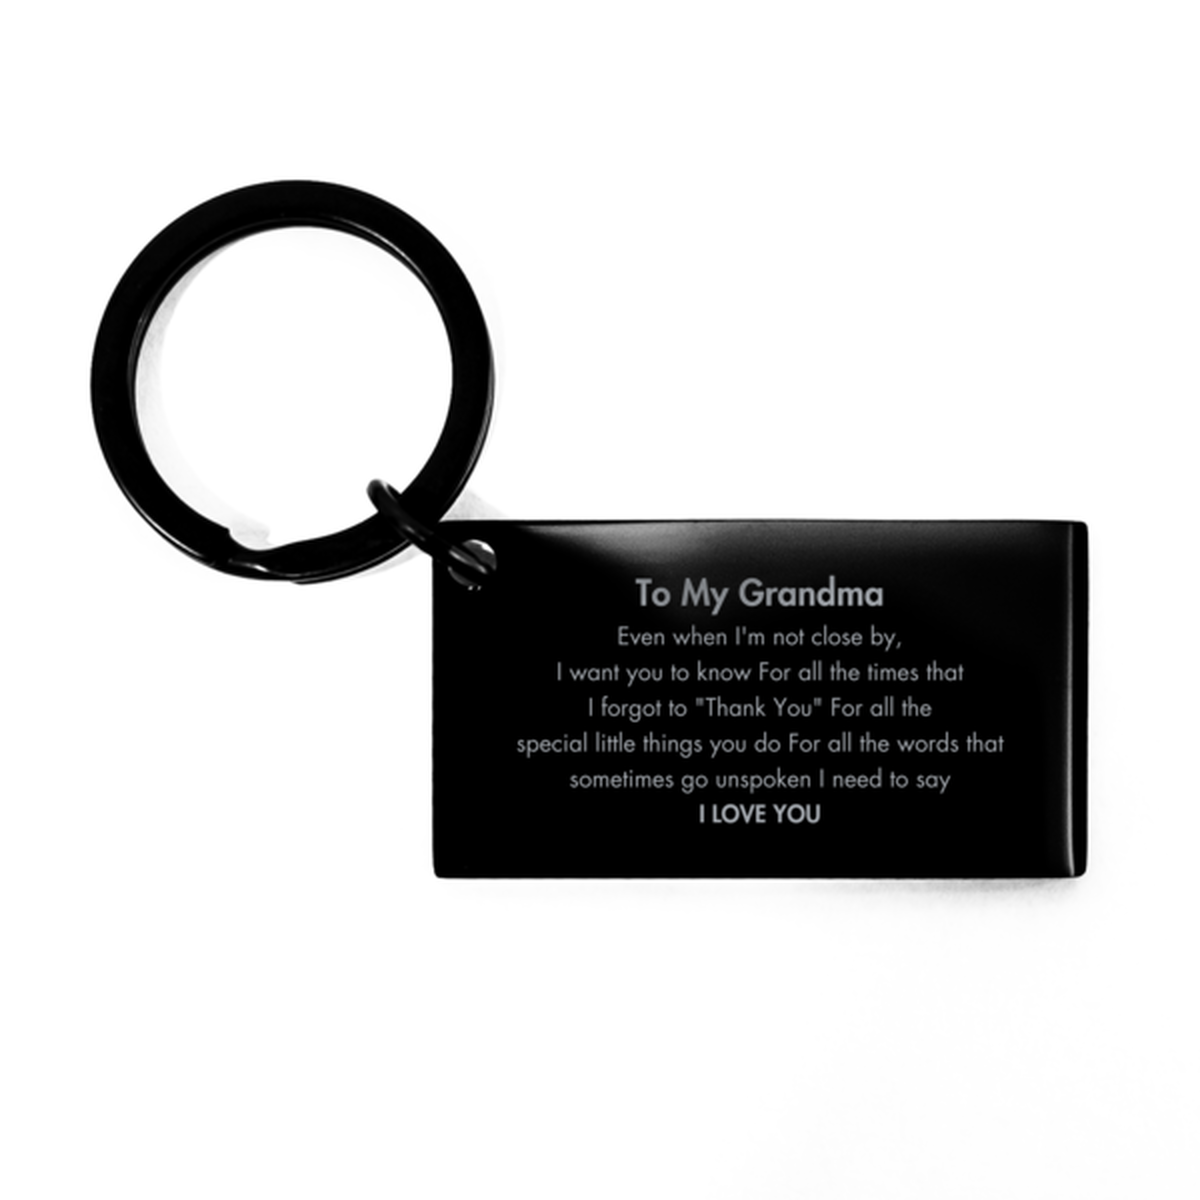 Thank You Gifts for Grandma, Keepsake Keychain Gifts for Grandma Birthday Mother's day Father's Day Grandma For all the words That sometimes go unspoken I need to say I LOVE YOU